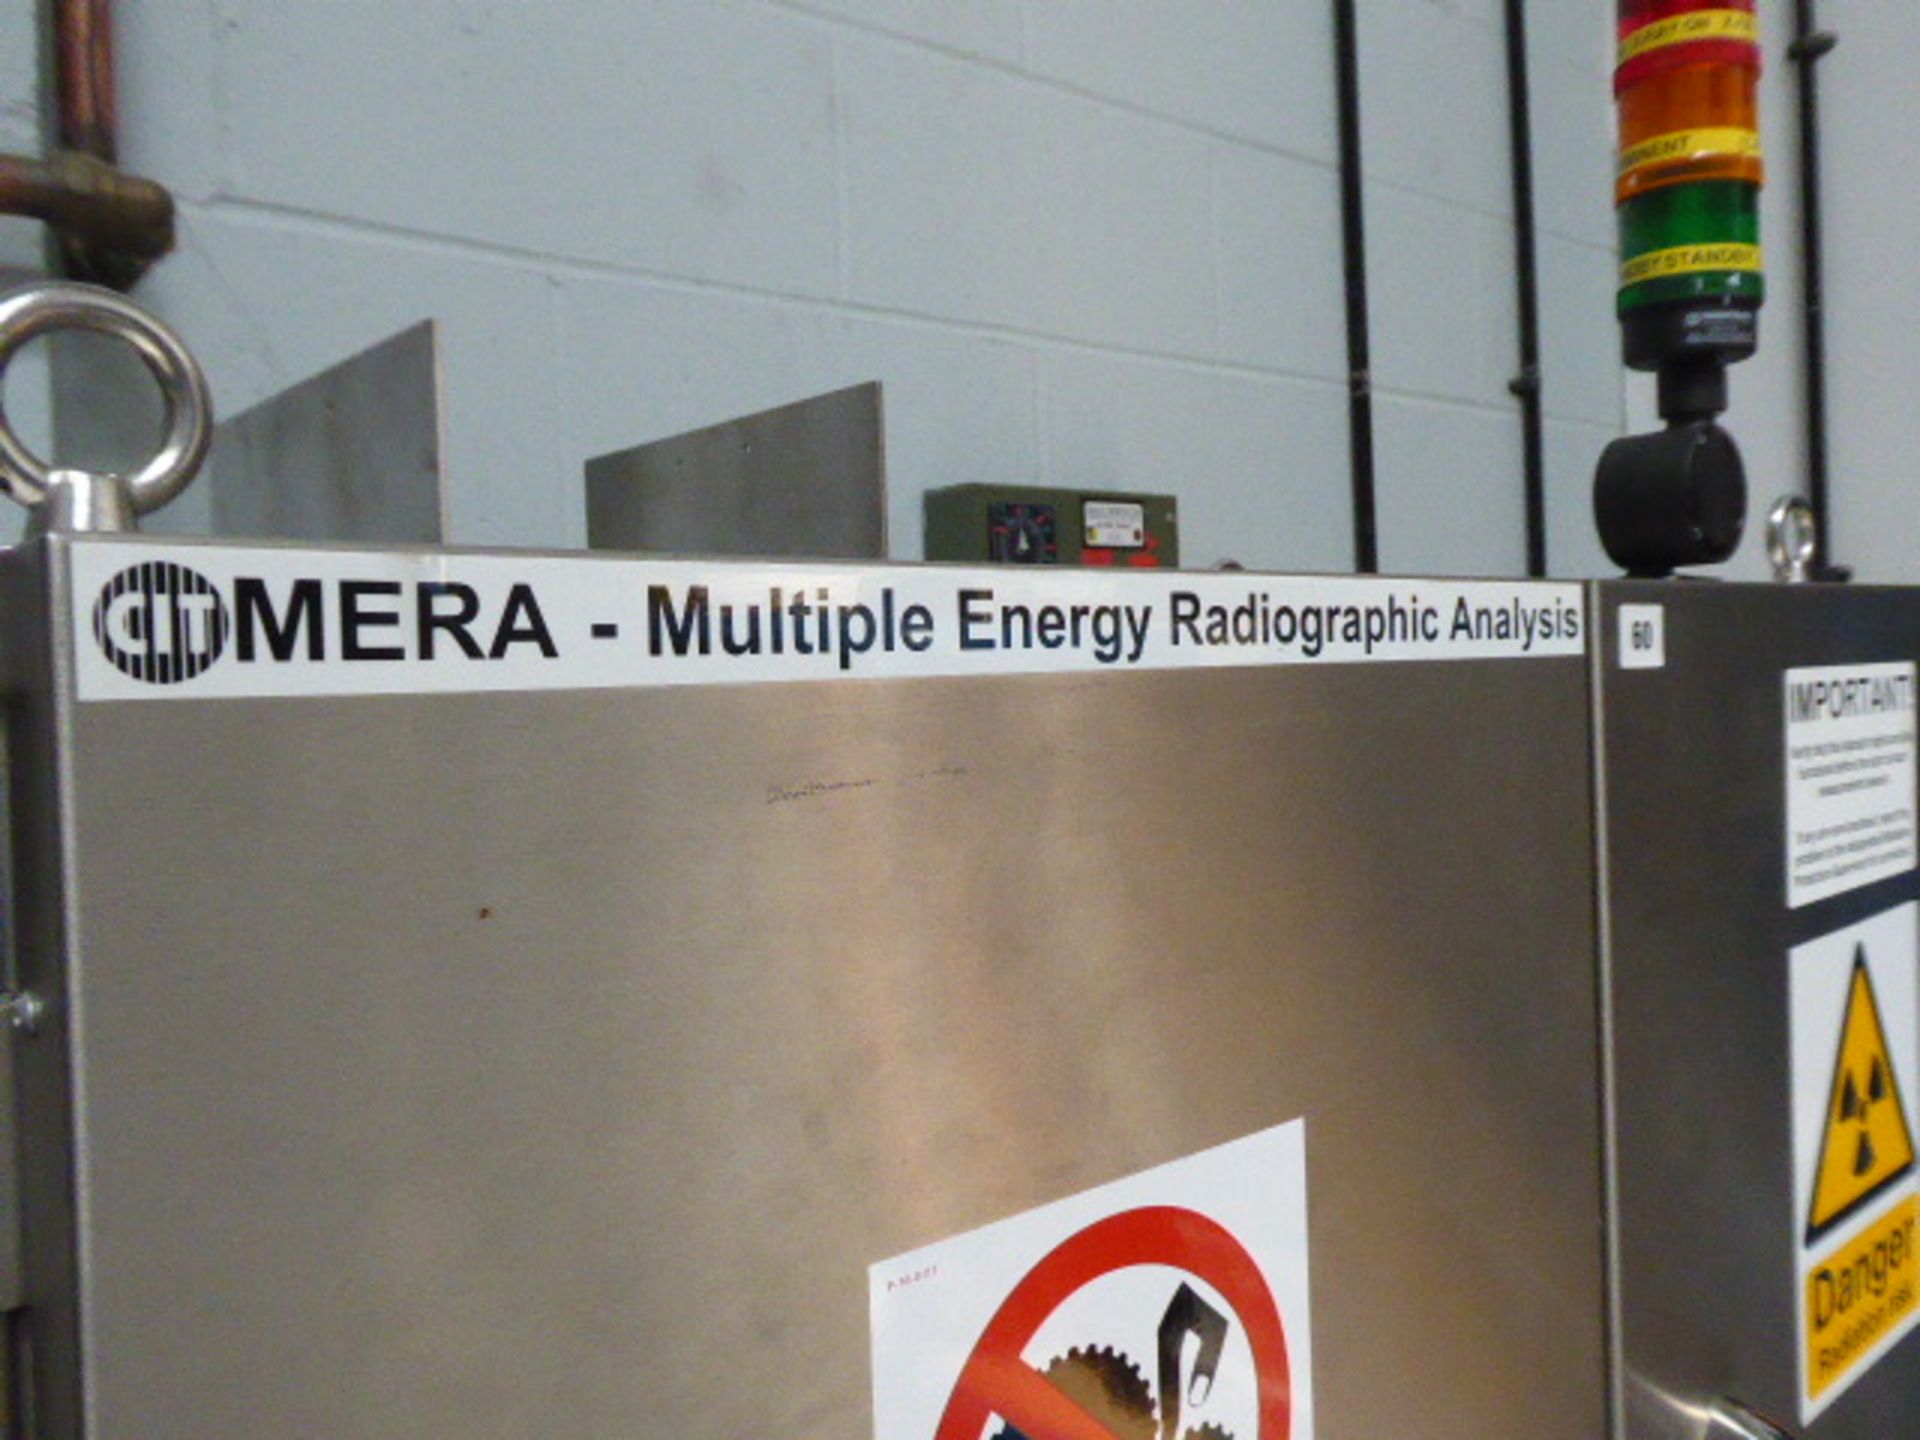 Mera control console multiple energy radiographic analysis cabinet mounted on mobile platform with - Image 8 of 9